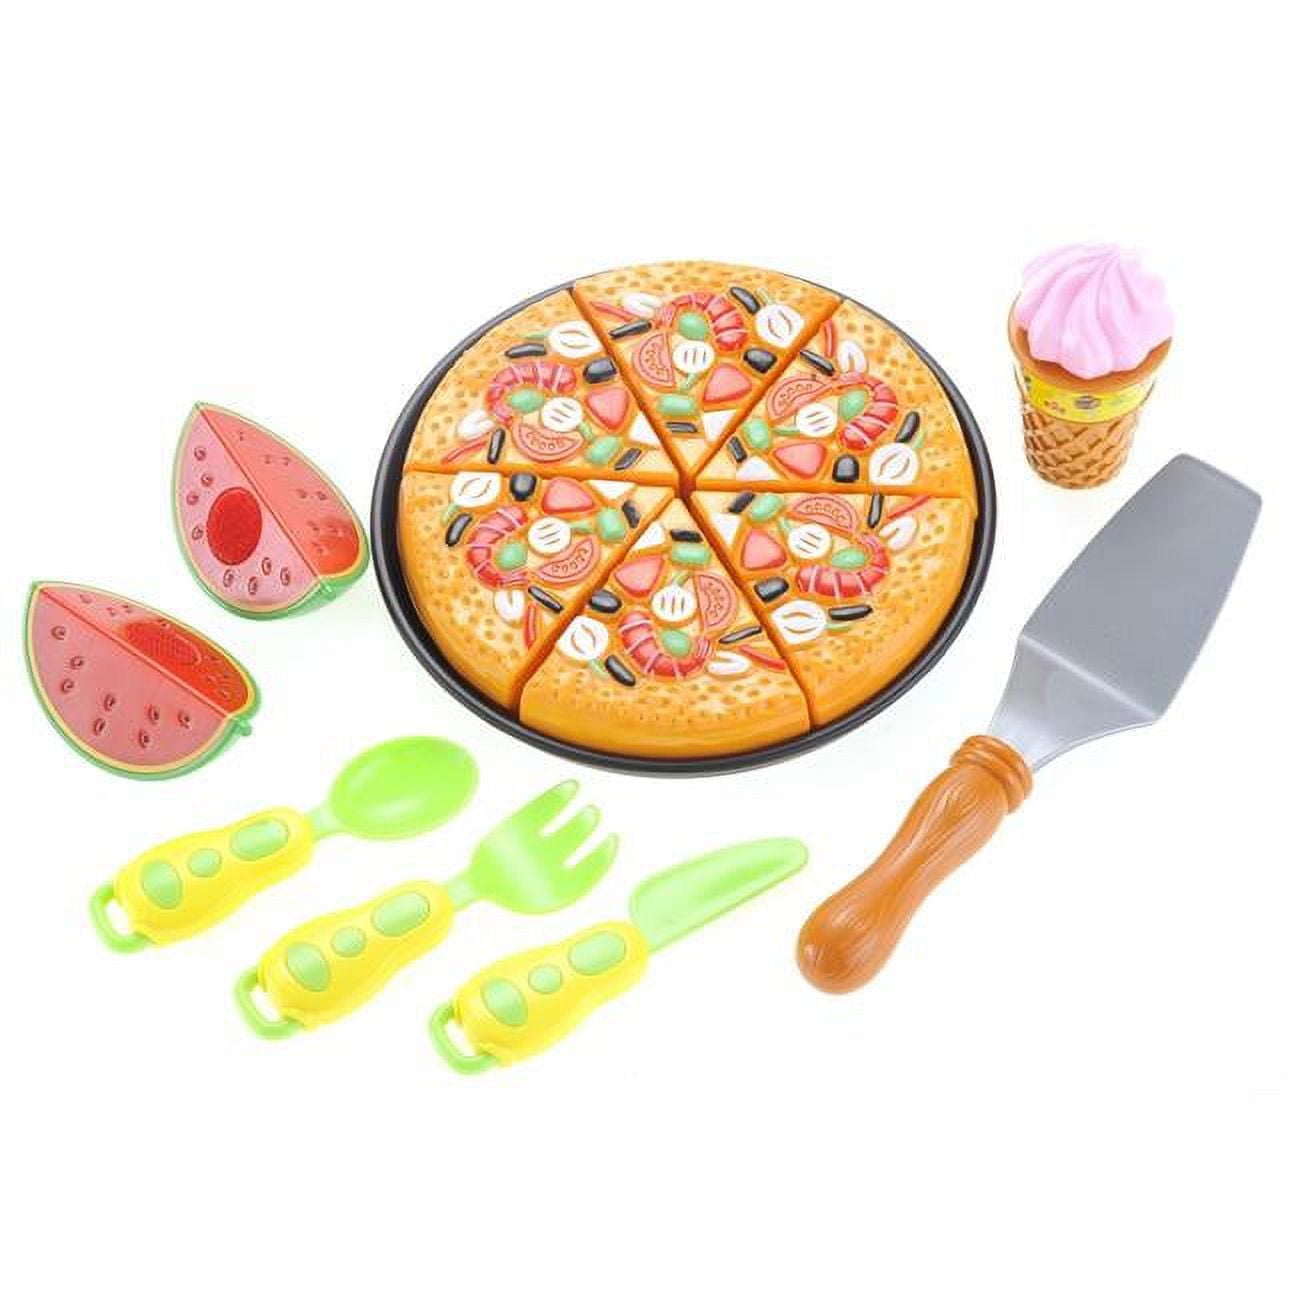 Psb16 Kitchen Fun Pizza Party For Kids Toy With Watermelon, Ice Cream & Utensils